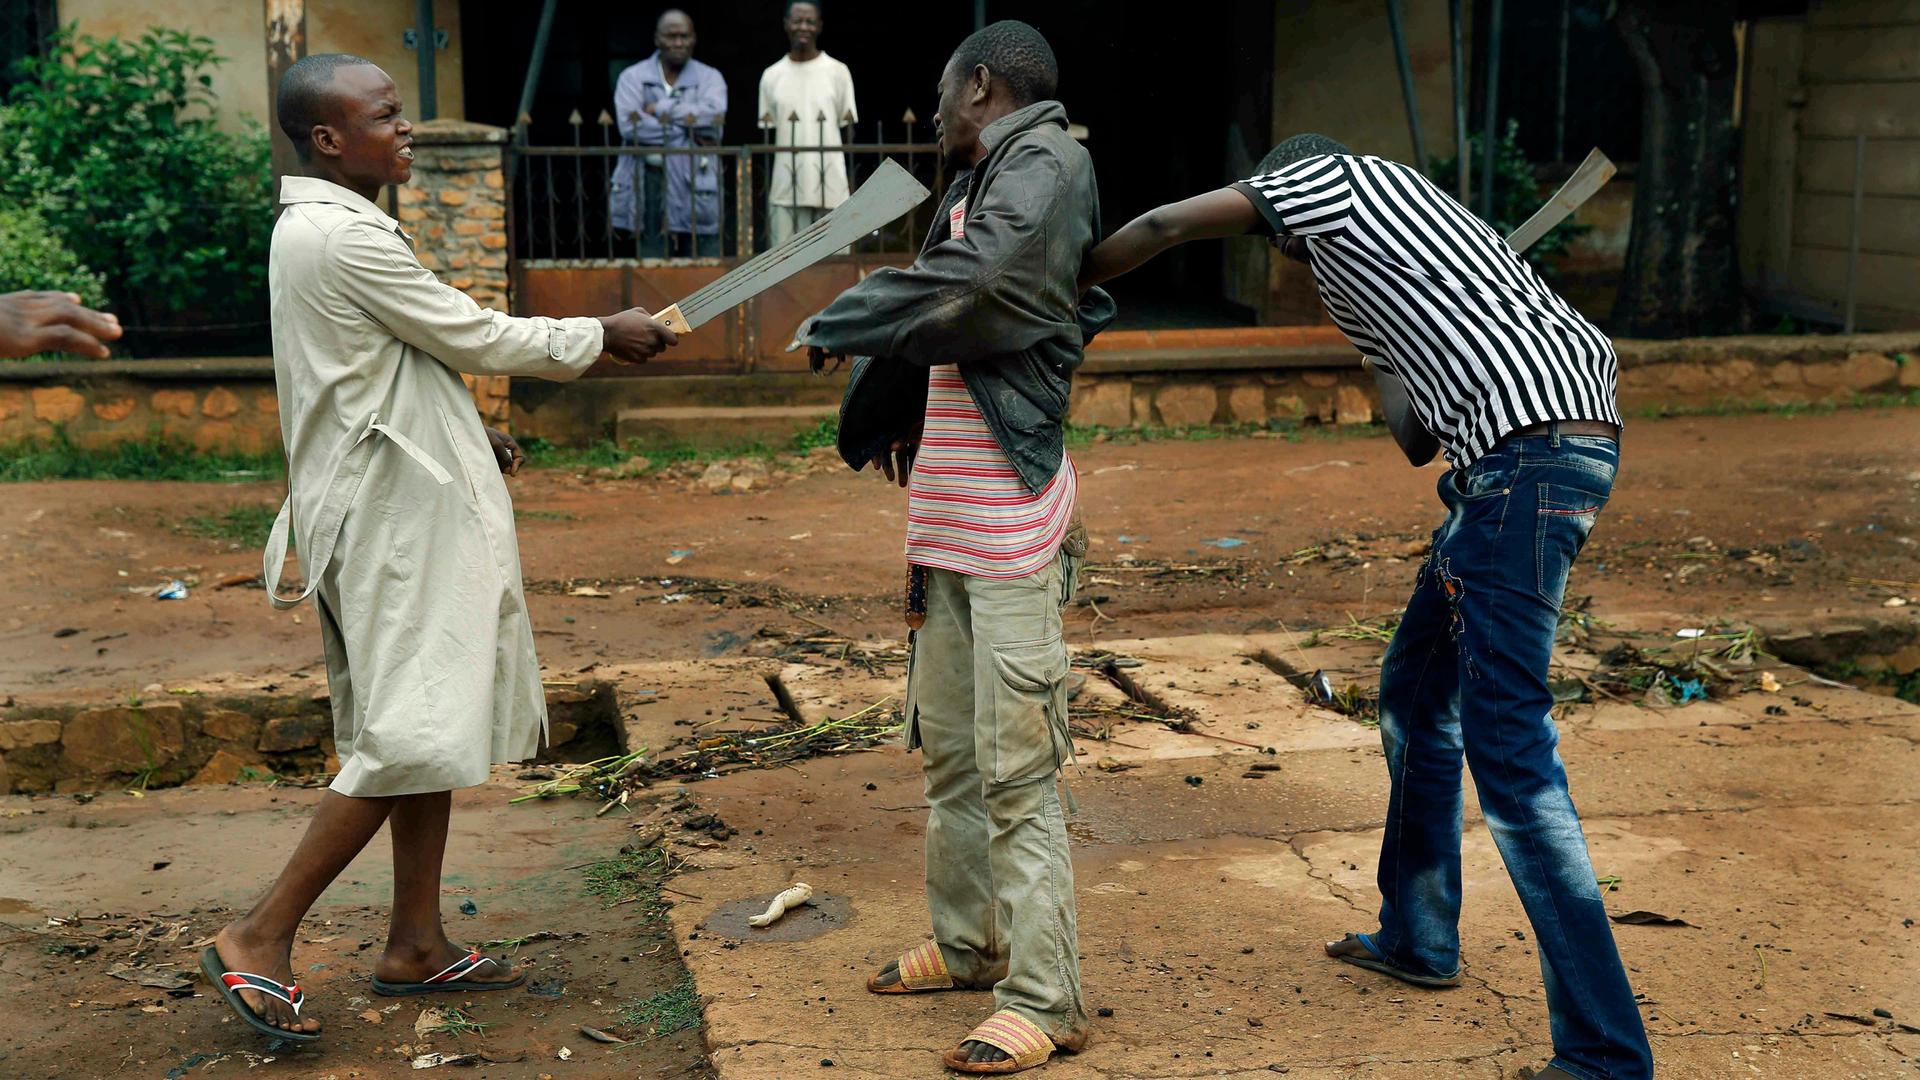 Muslim men organized in militias with machetes rough up a Christian man while checking him for weapons in the Miskine neighborhood of Bangui, Central African Republic.